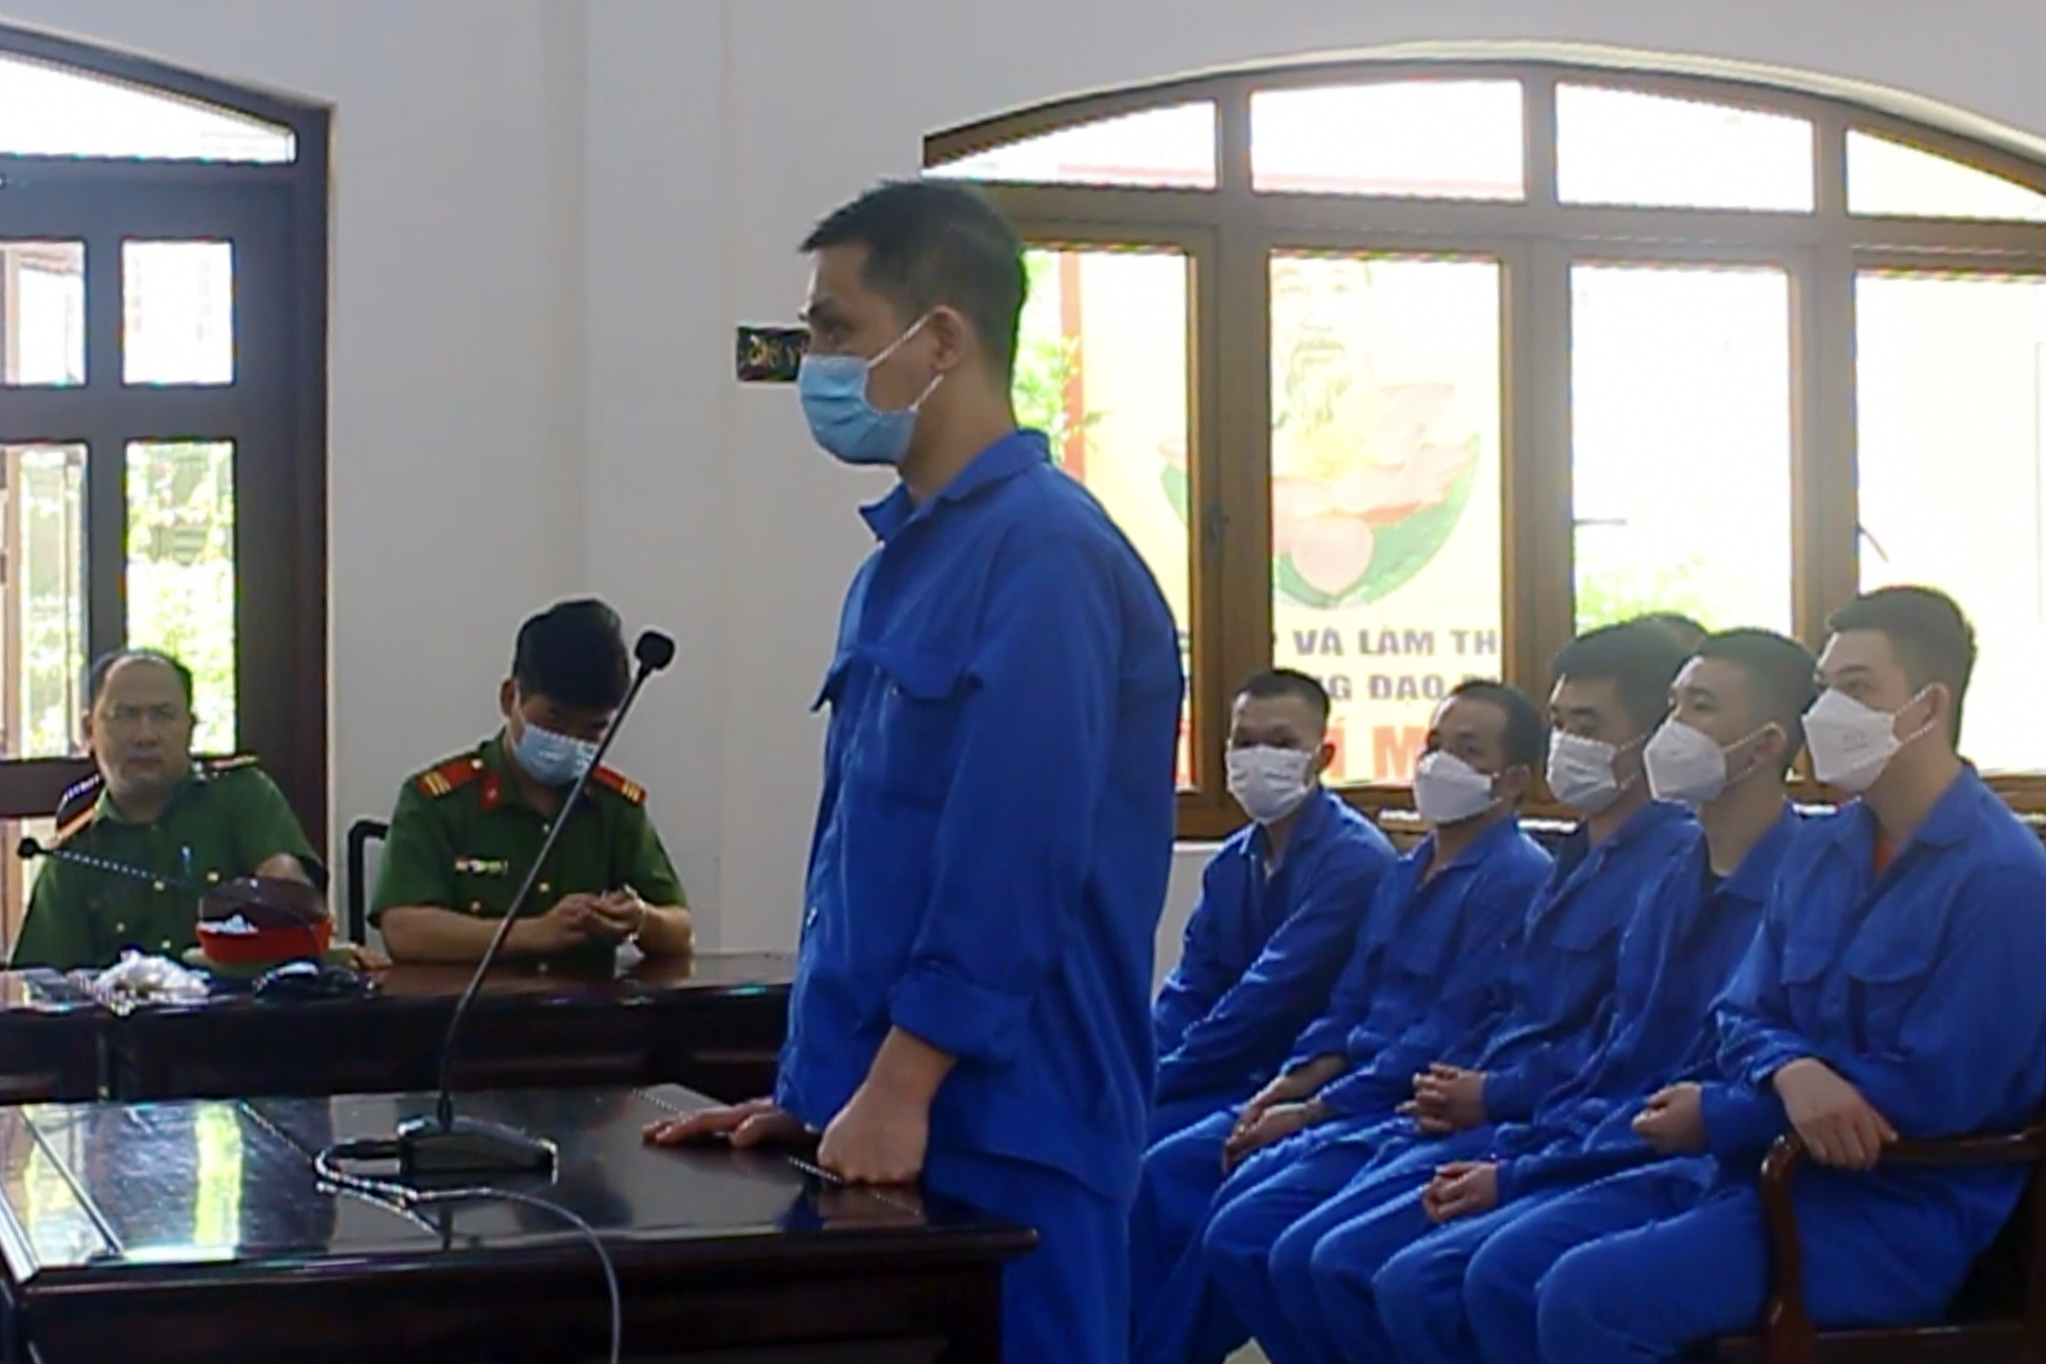 Vietnamese man sentenced to death for trading over 3kg of drugs